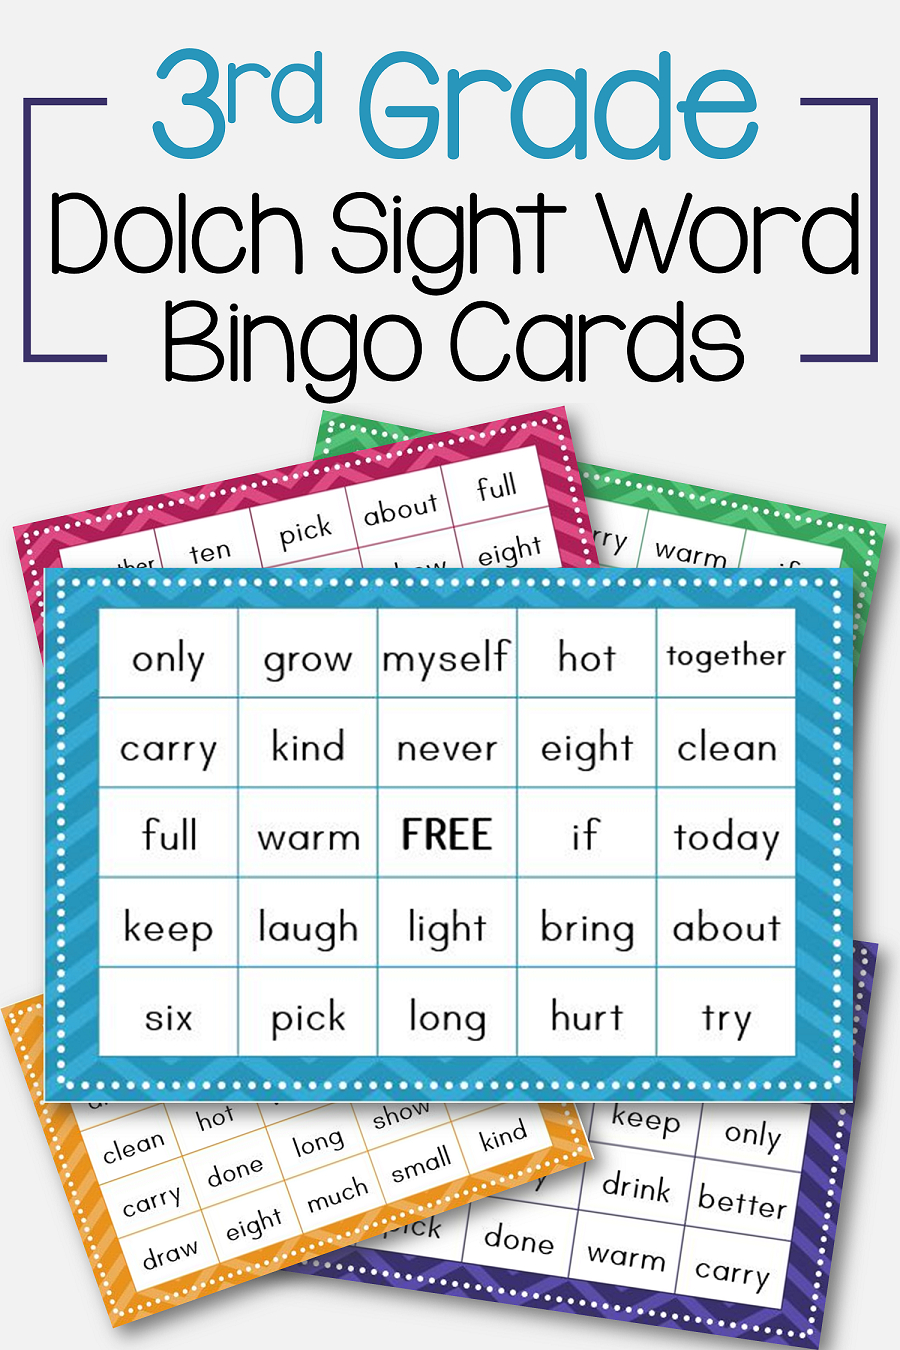 3Rd Grade Dolch Sight Word Bingo Card Printable: Includes 30